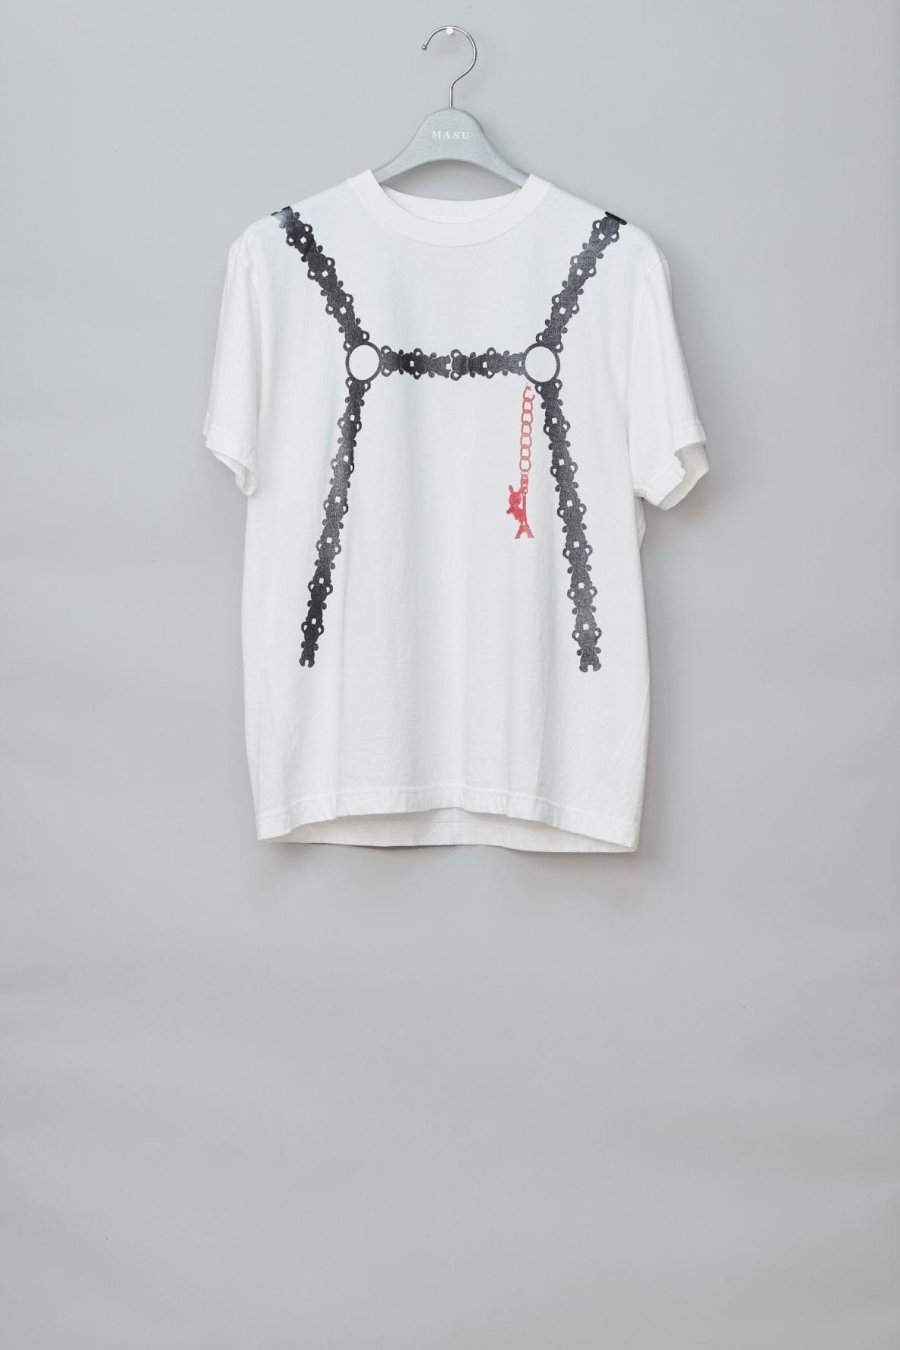 MASU  FLOCKY DOLL HARNESS T-SHIRT(WHITE)<img class='new_mark_img2' src='https://img.shop-pro.jp/img/new/icons15.gif' style='border:none;display:inline;margin:0px;padding:0px;width:auto;' />